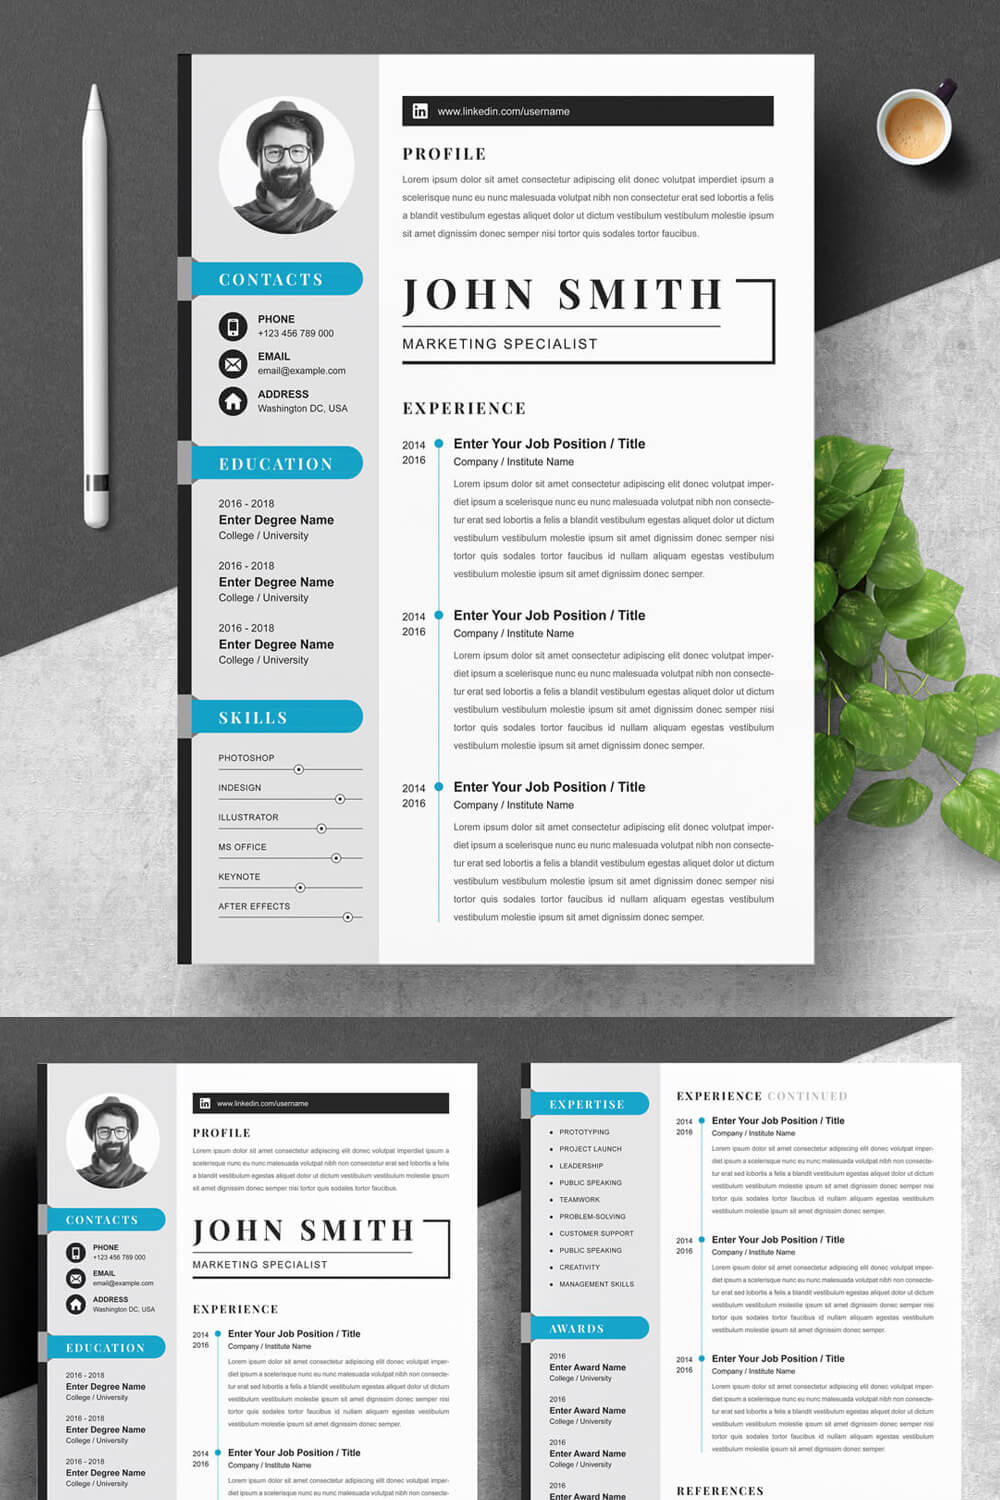 Clean and modern resume template with blue accents.